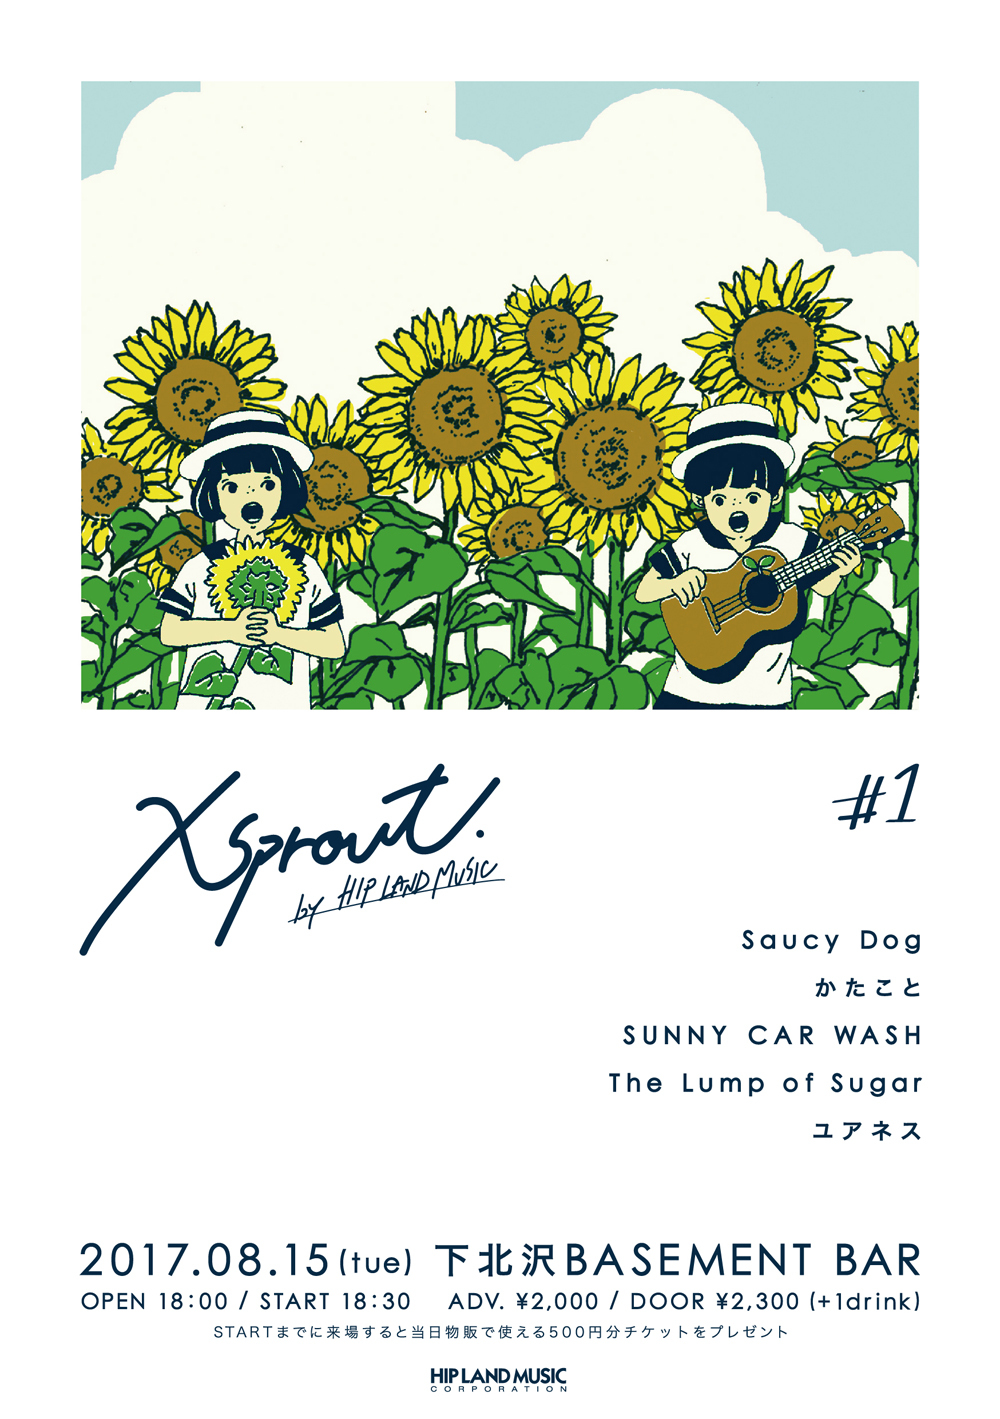 『xsprout. #1』